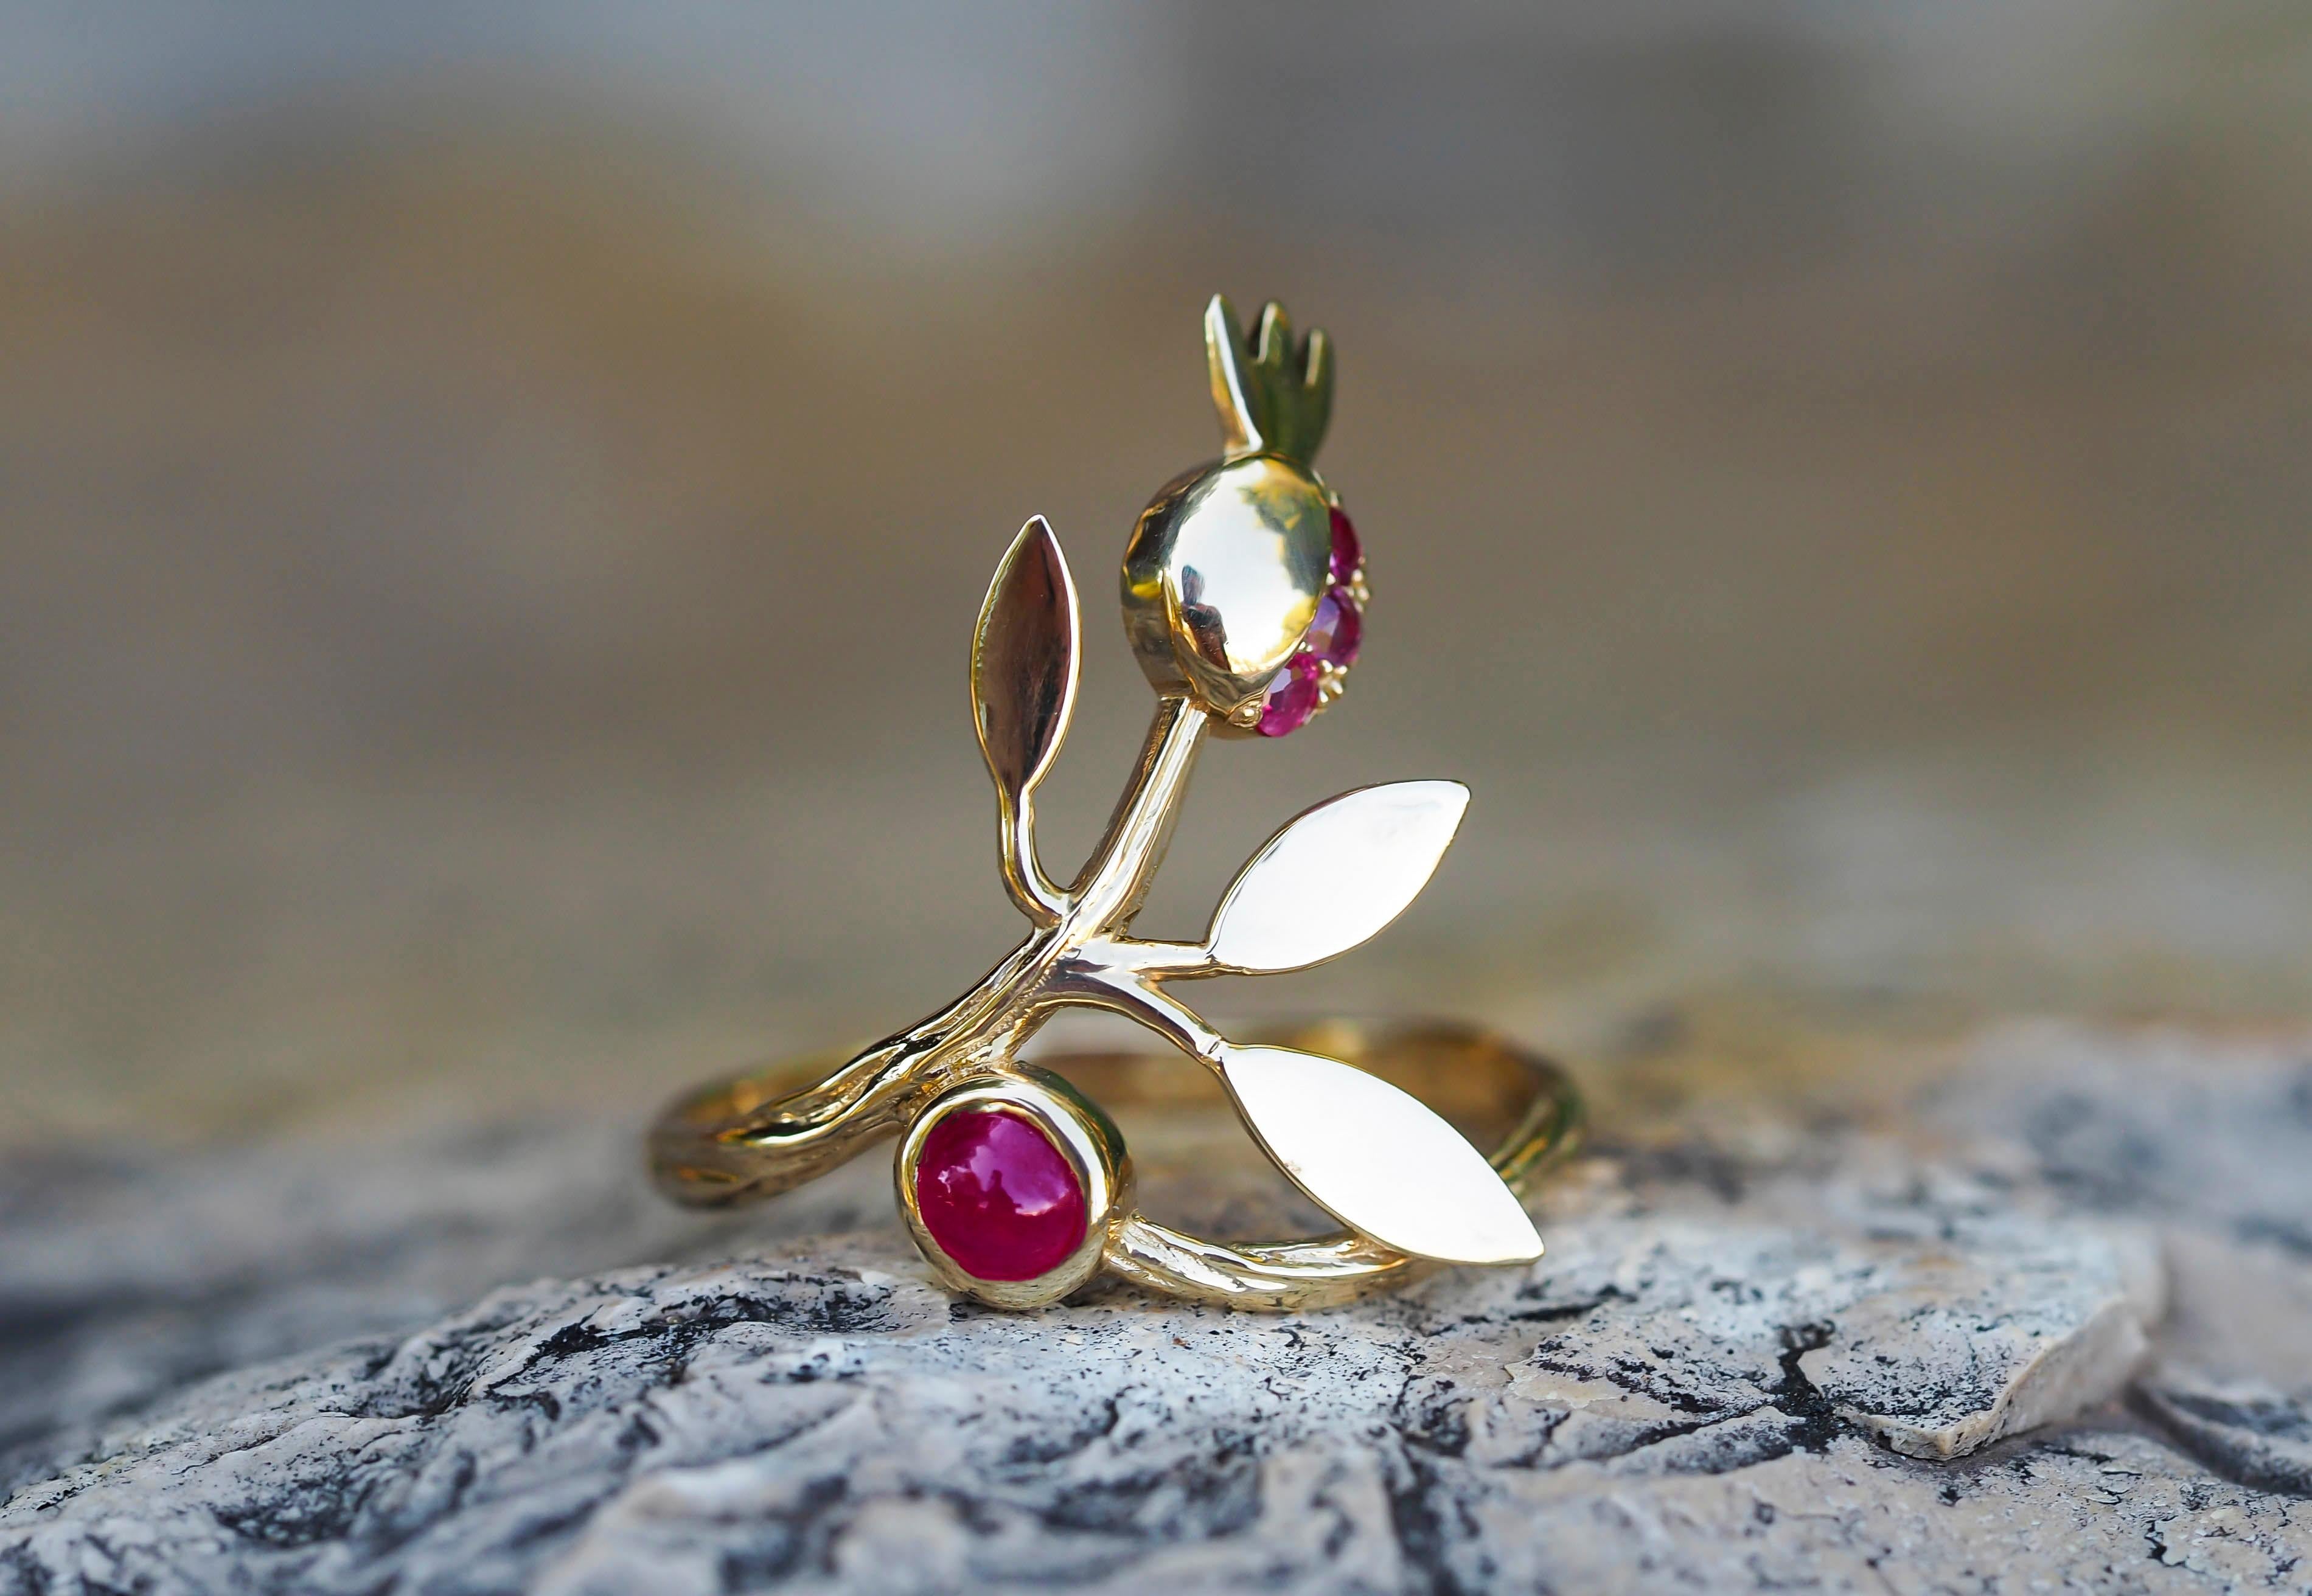 For Sale:  14 karat Gold Ring with Ruby, Sapphires. Pomegranate ring. July birthstone ring! 19